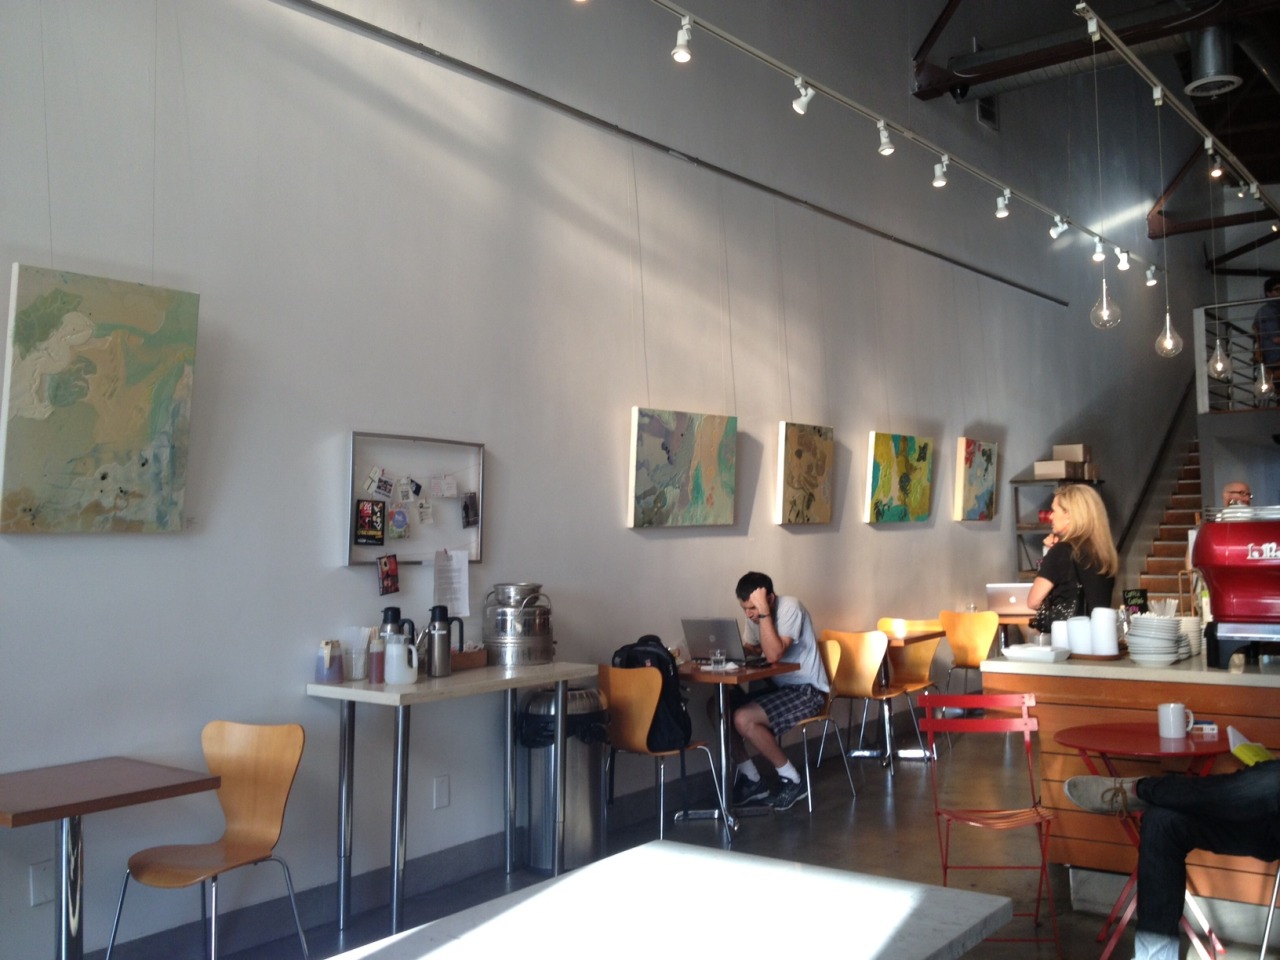 Keystone artist Joelle Cooperrider installation is up at Bru Coffee in Los Feliz. Looks beautiful. Be sure to stop by if in the neighborhood: 1866 N Vermont, they are open until 8 daily. Congratulations, Joelle!